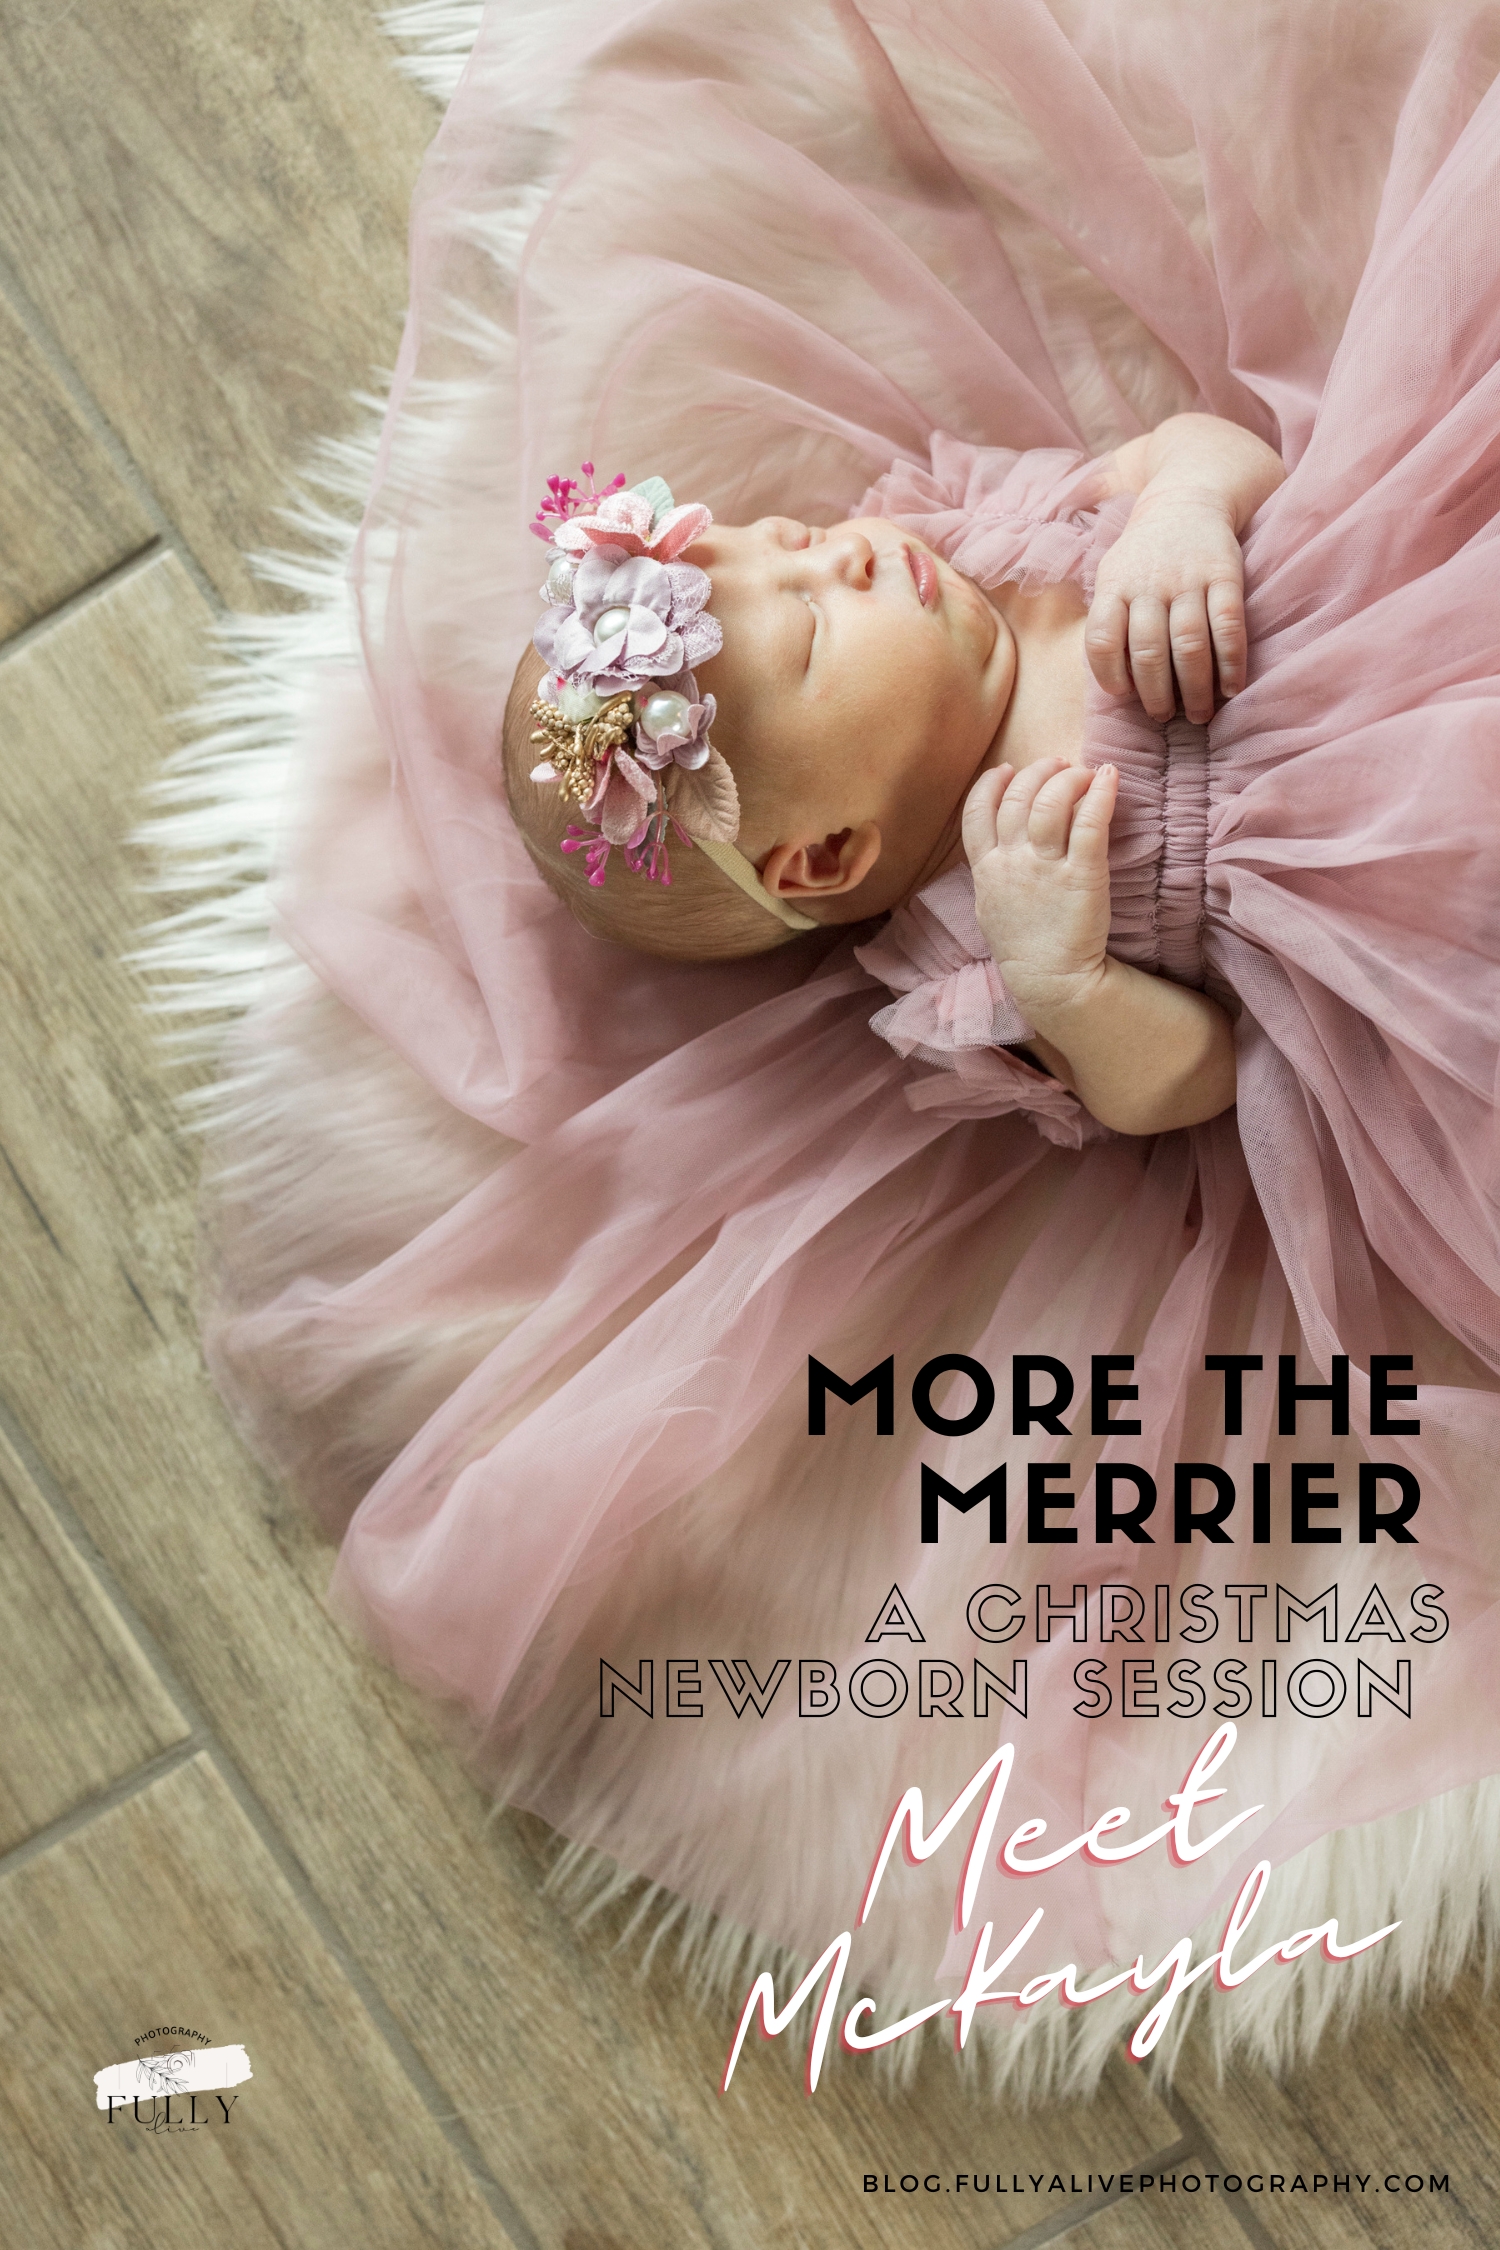 The More The Merrier A Christmas Newborn Session Meet Baby McKayla